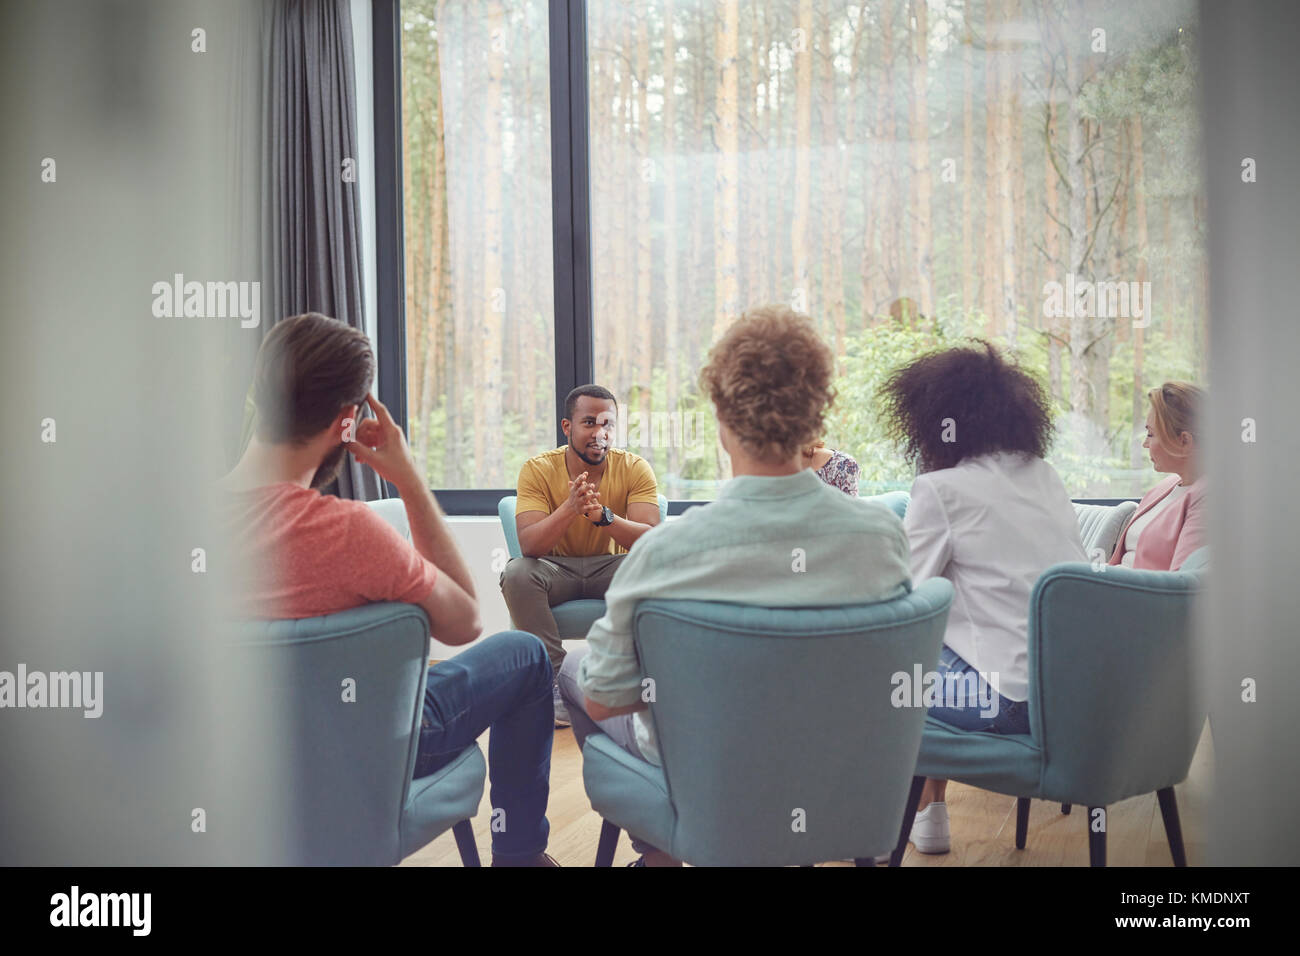 Man talking in group therapy session Stock Photo